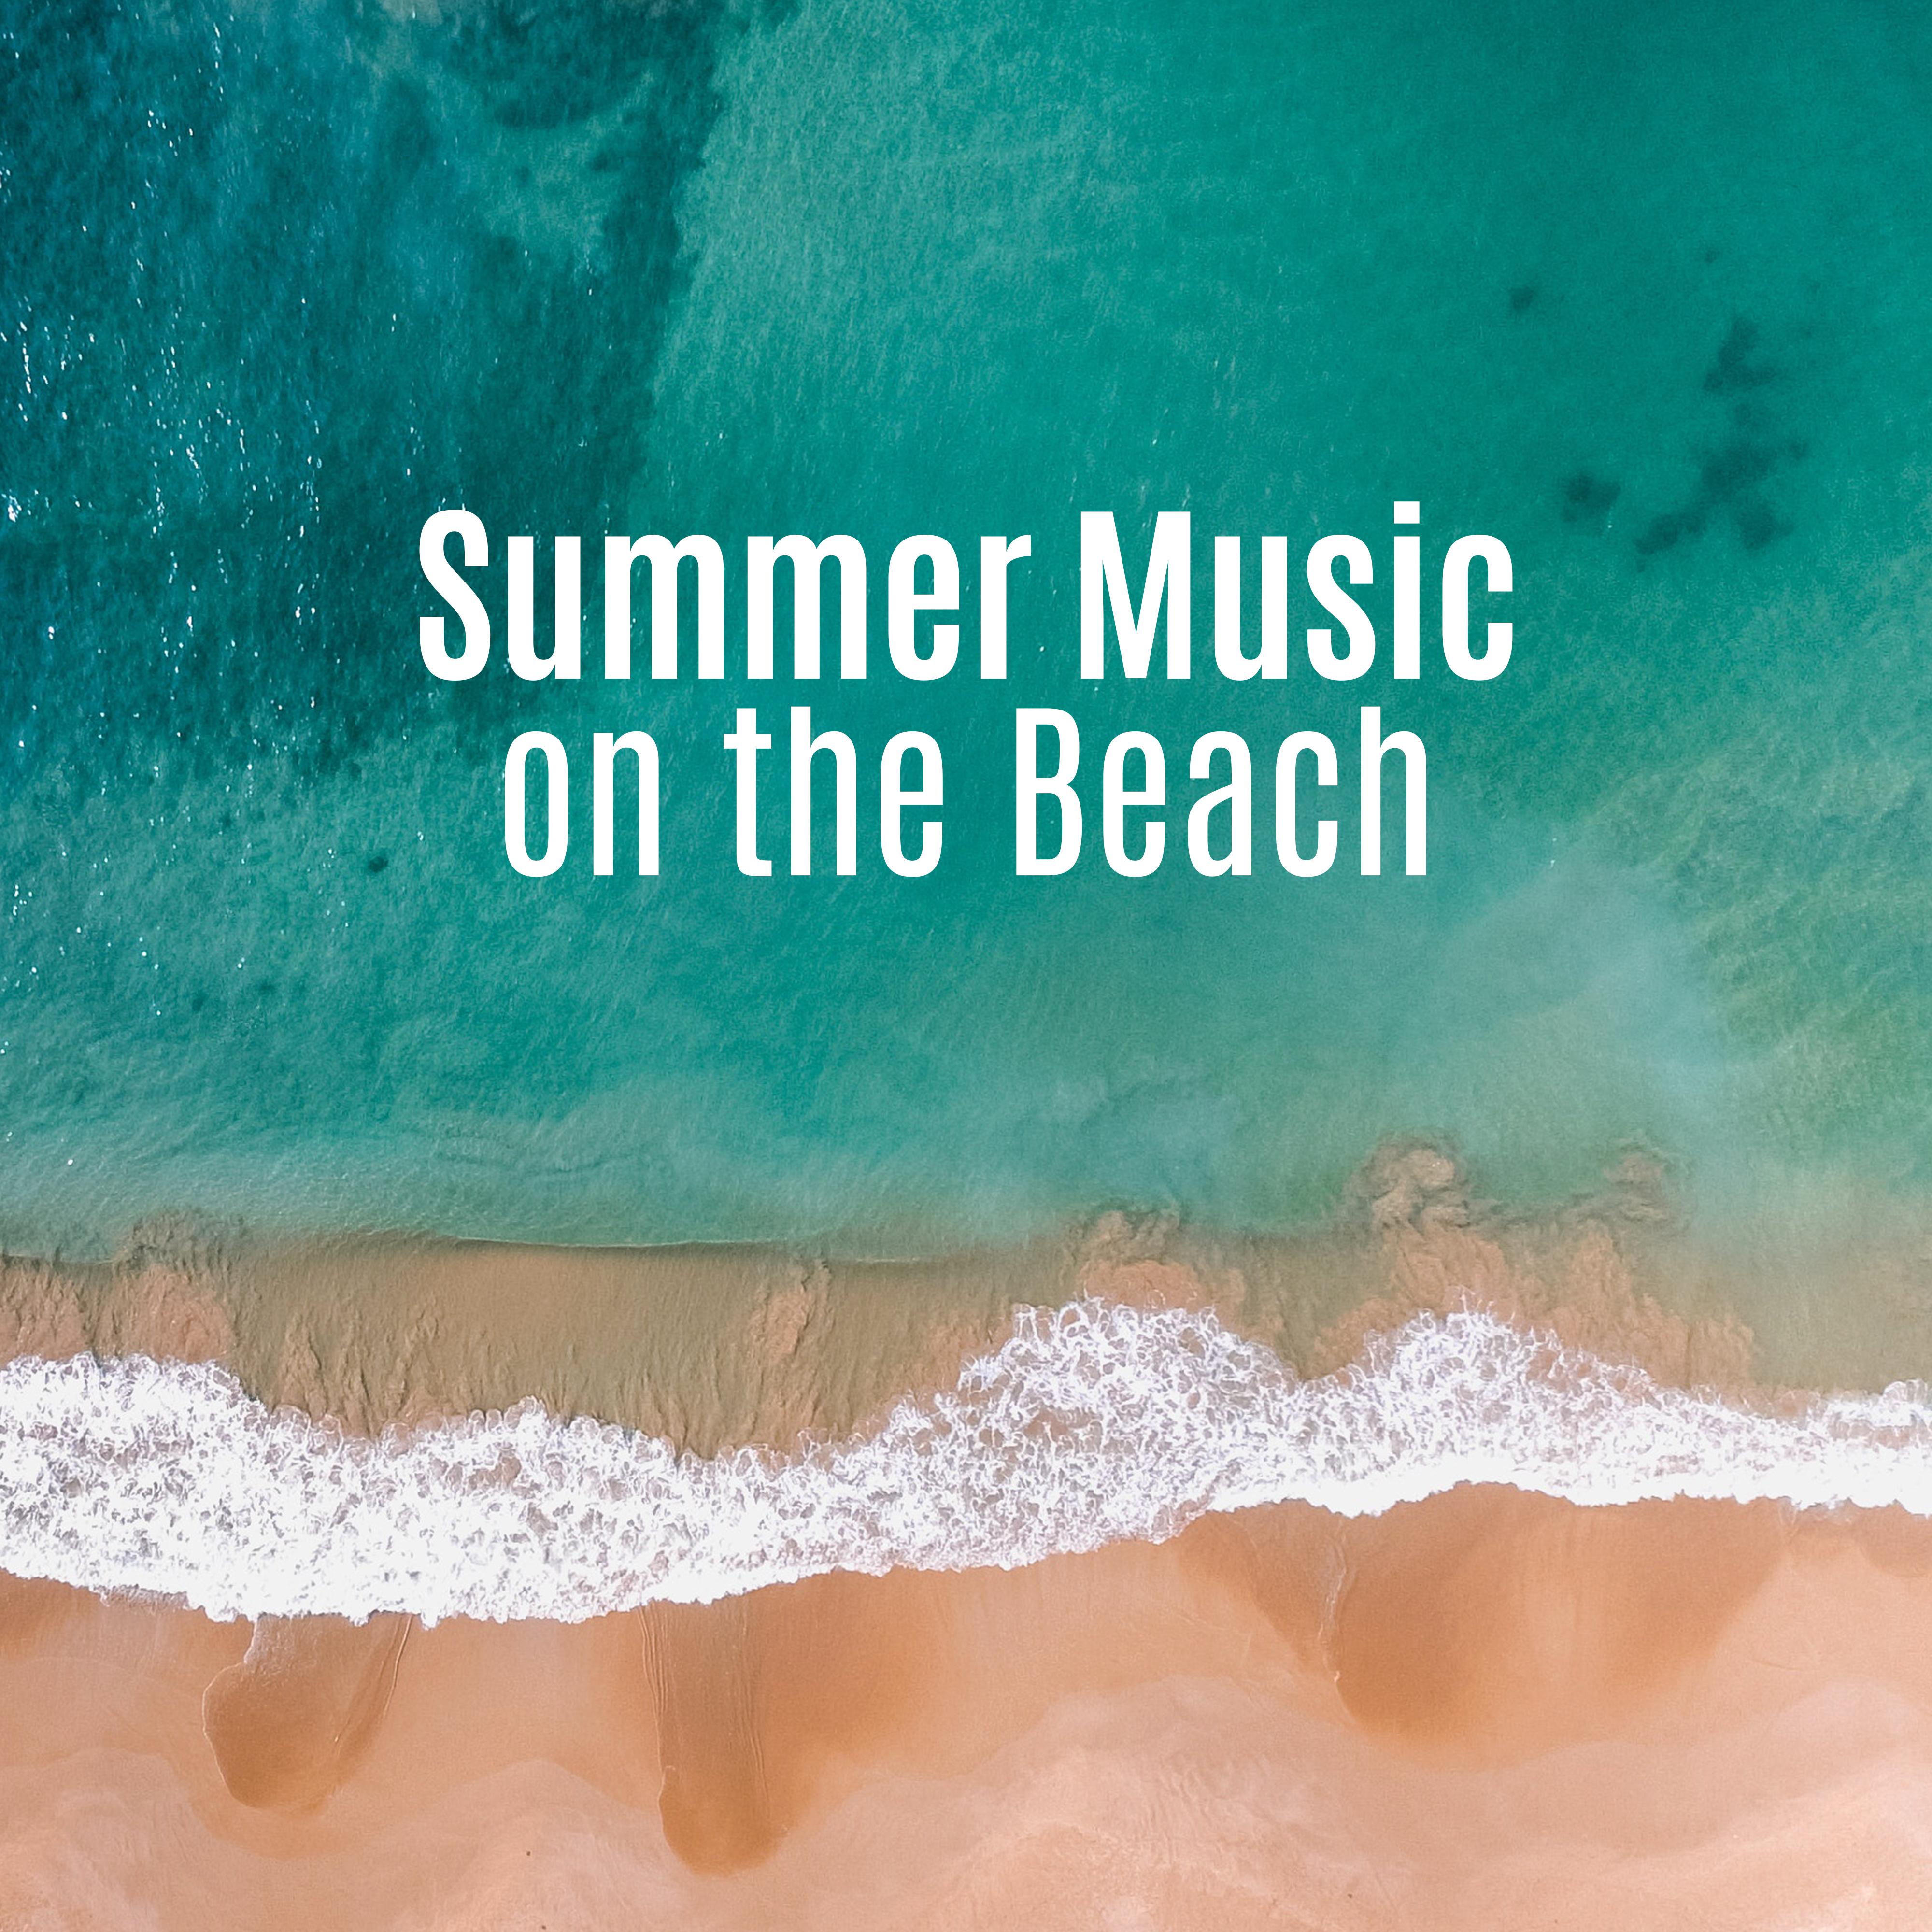 Summer Music on the Beach: Relaxing Chill Out 2019, Deep Relaxation, Beach Music